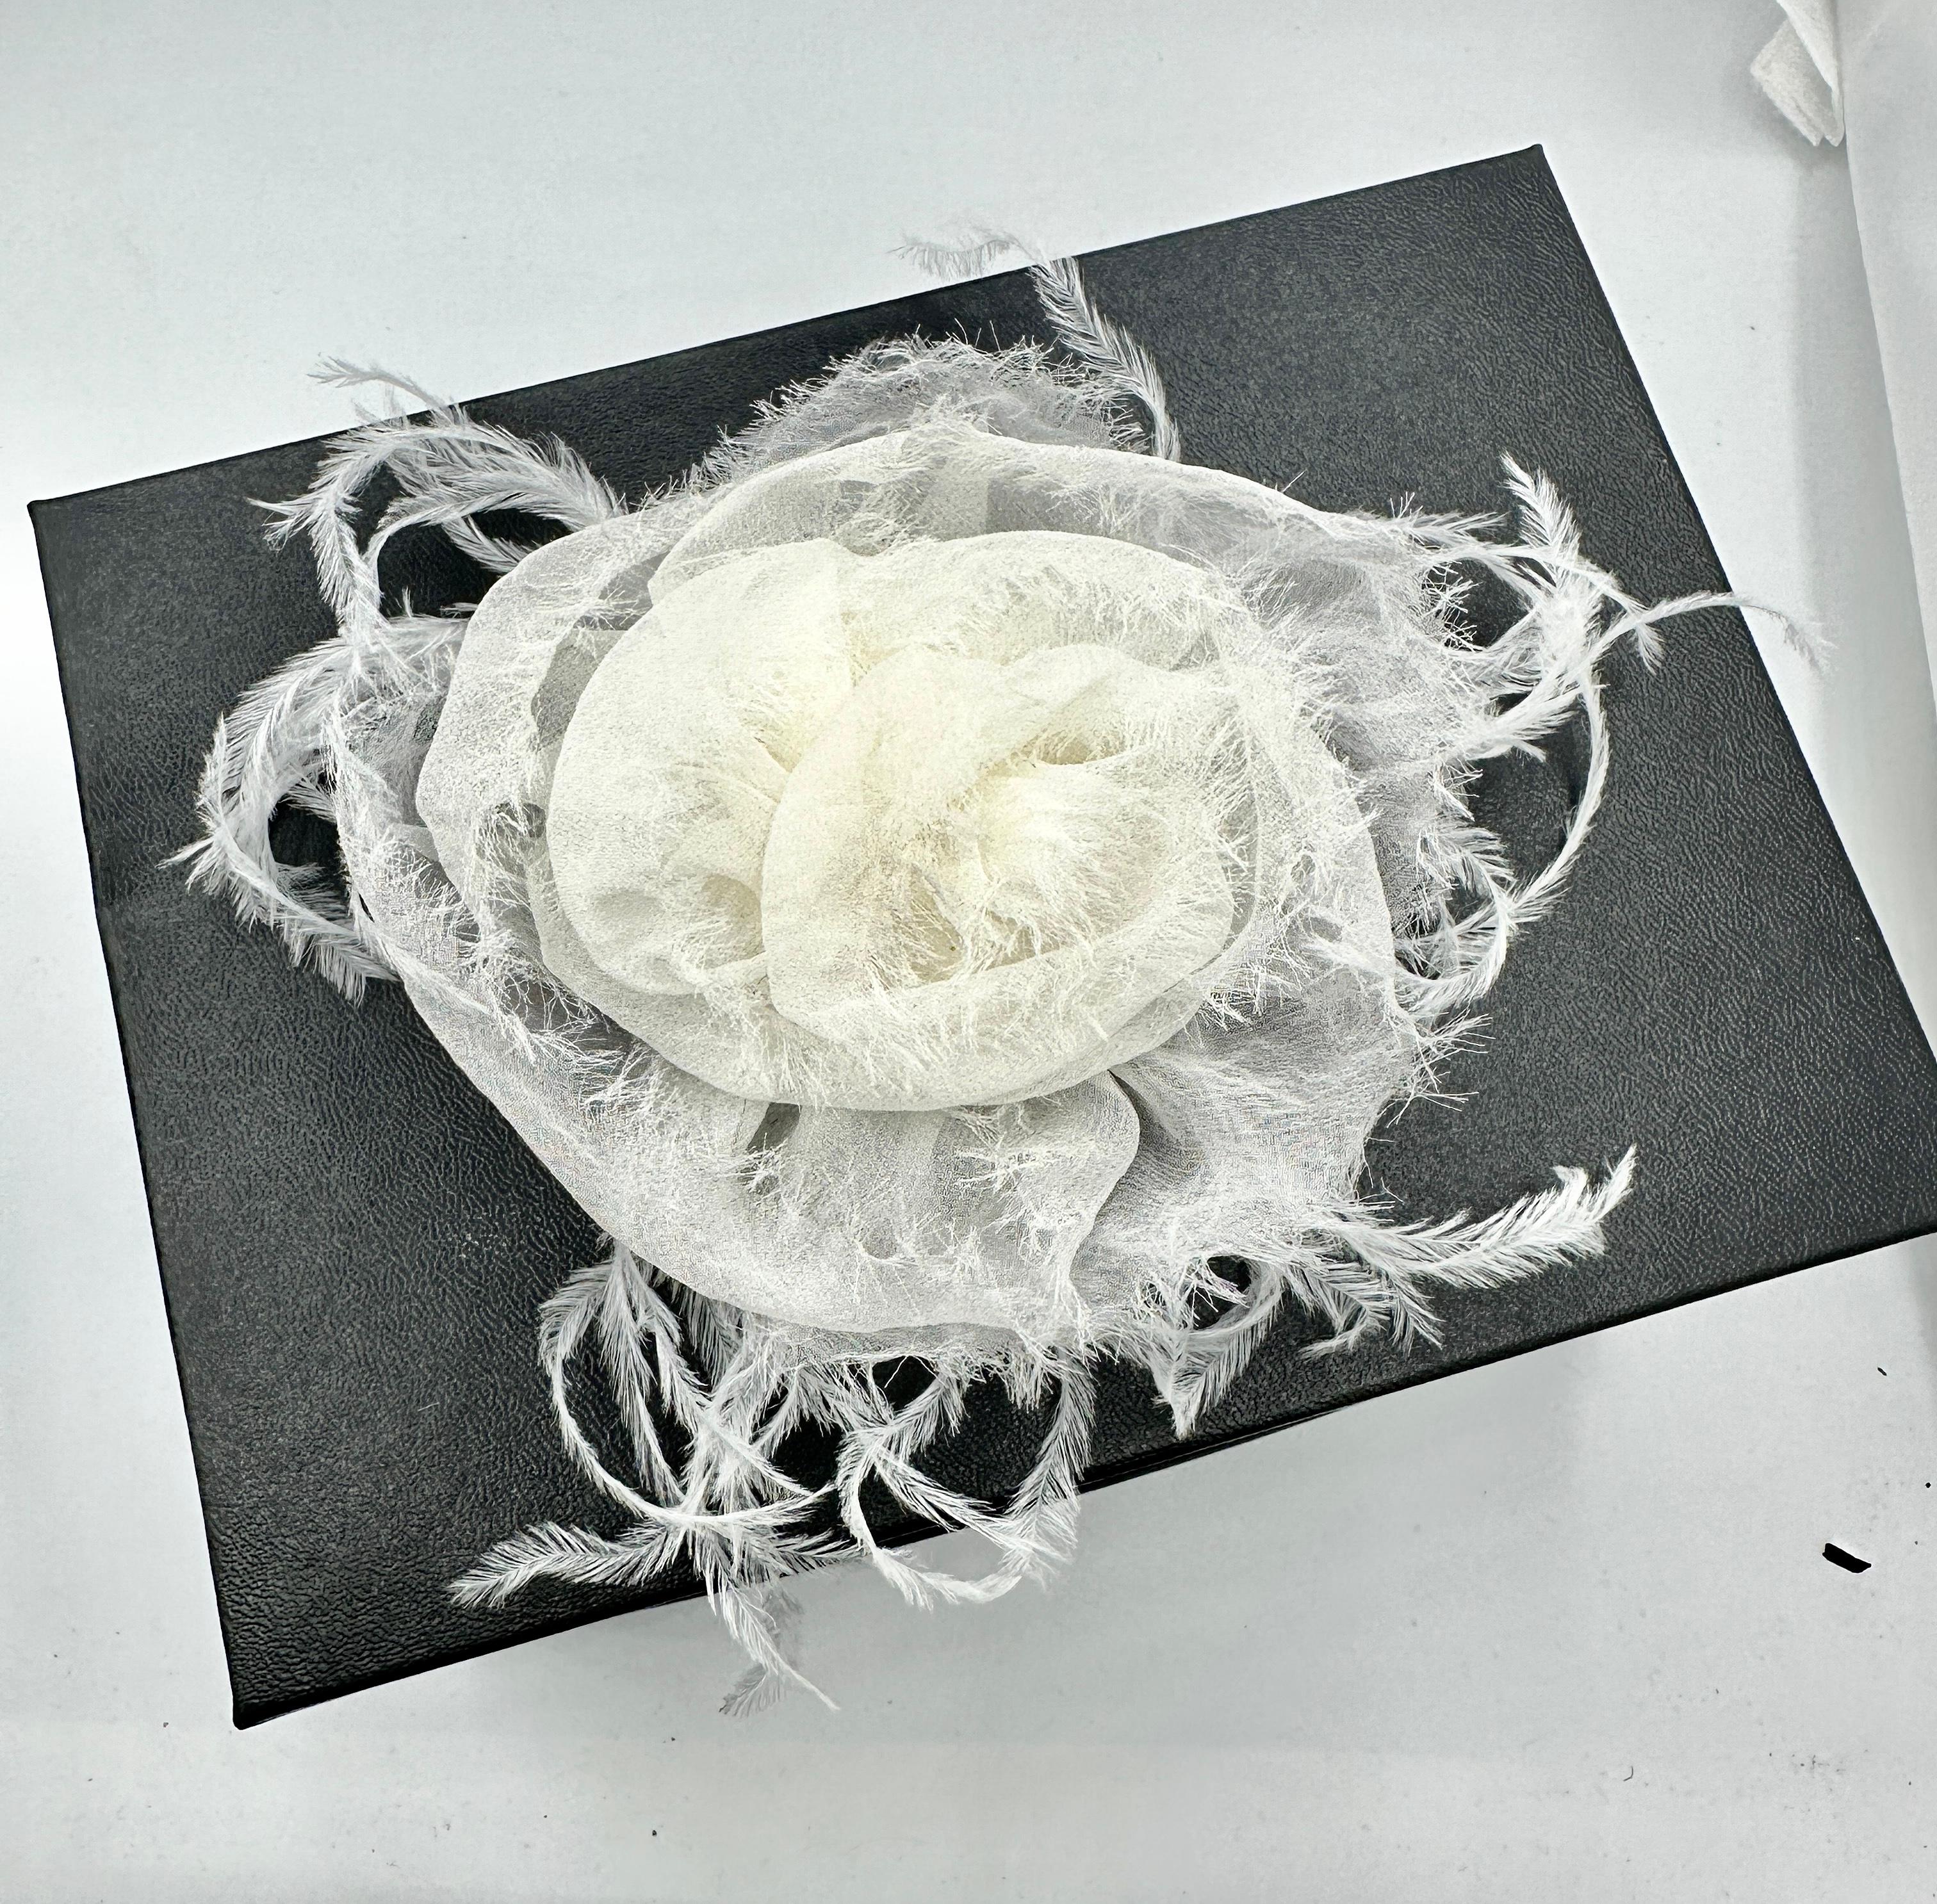 This is a fabulous vintage Chanel Caméllia Flower brooch in White Silk Crepe and Feathers.   It is an elegant vintage brooch by the House of Chanel in a rare and wonderful design.  The rare Camellia Flower is constructed with three dimensional silk